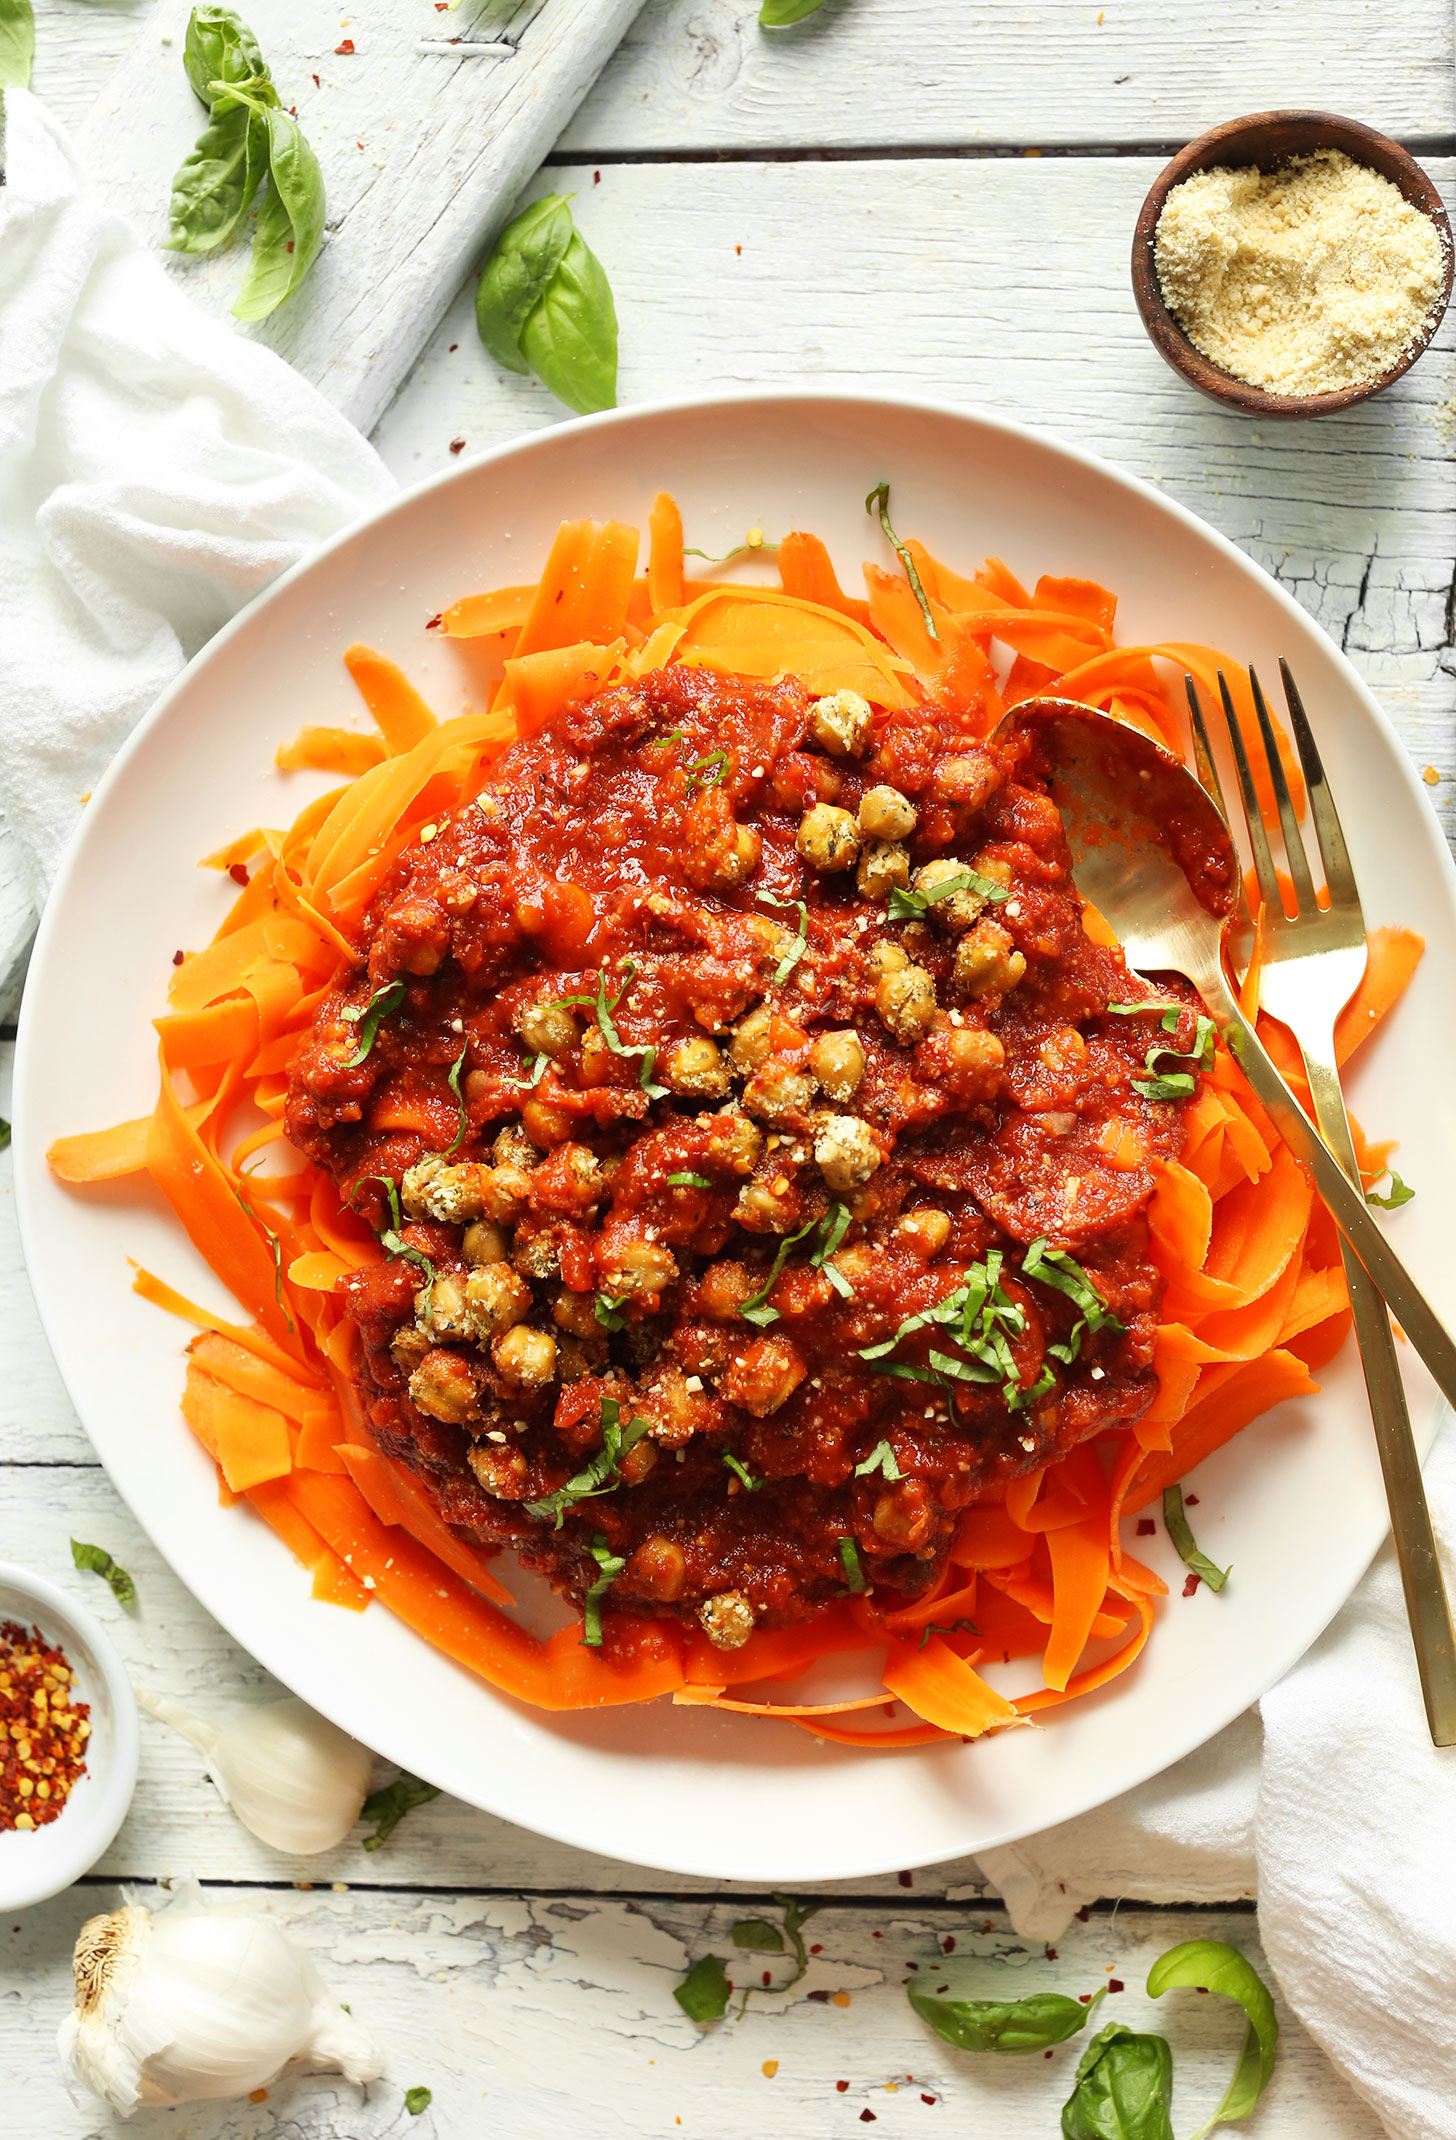 Big plate filled with our recipe for healthy Chickpea Bolognese with Carrot Noodles